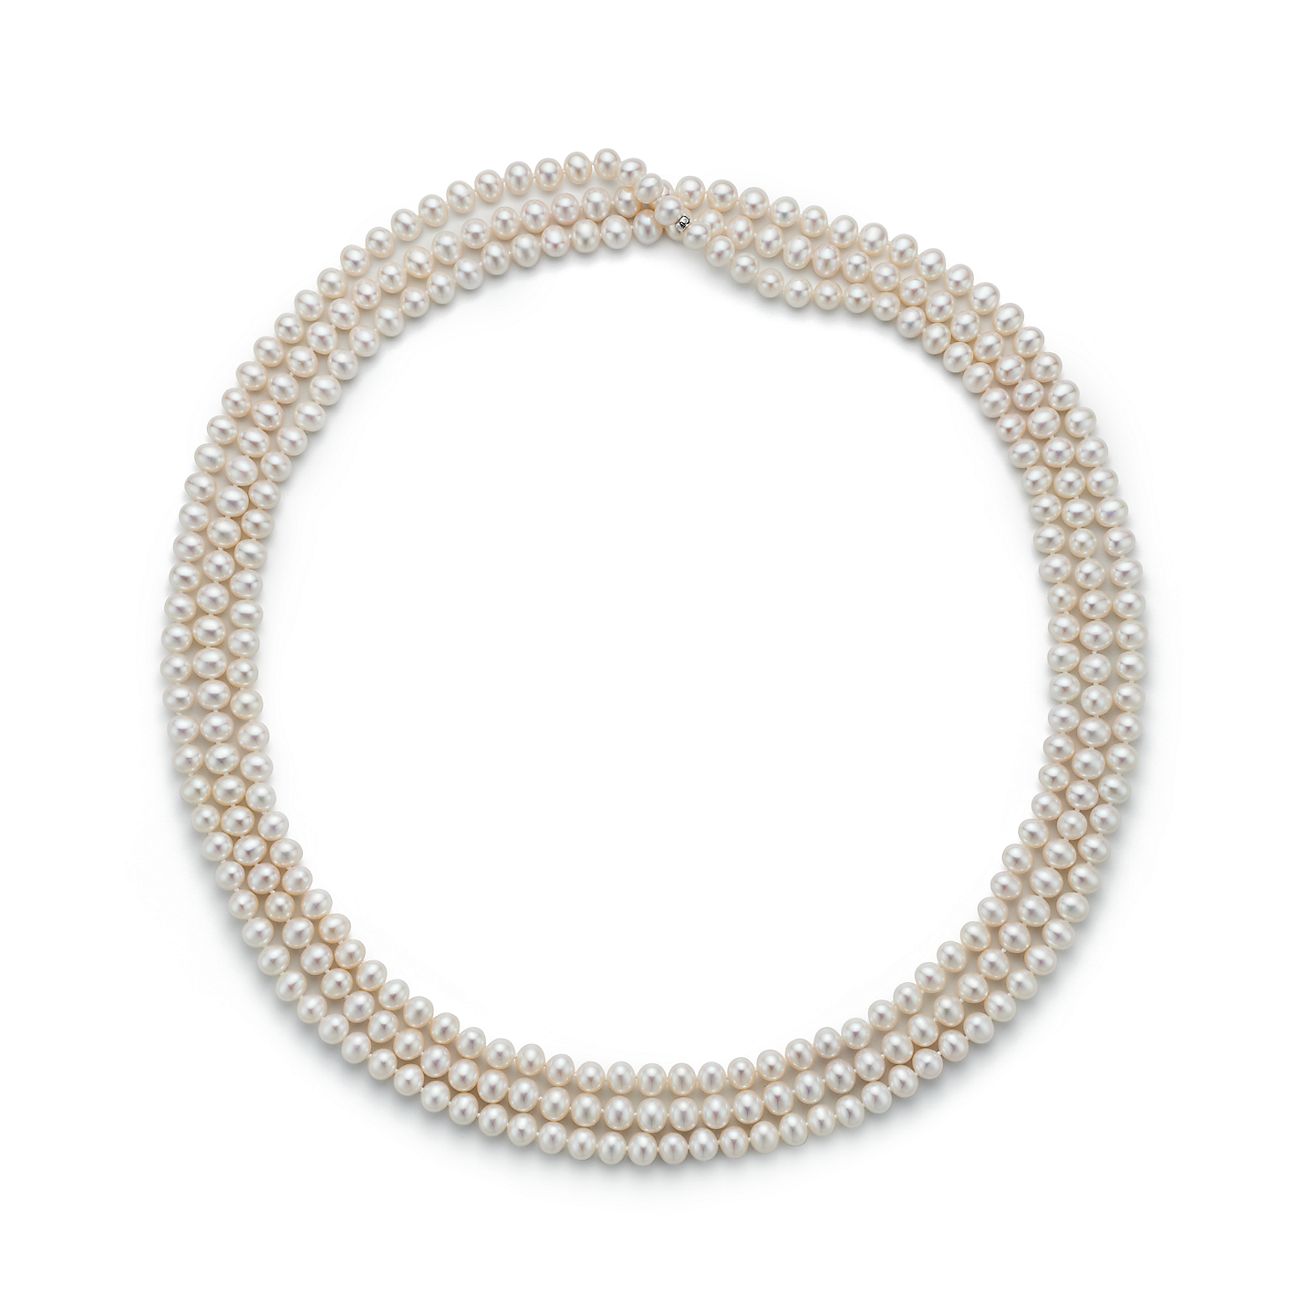 Ziegfeld Collection necklace of freshwater cultured pearls.